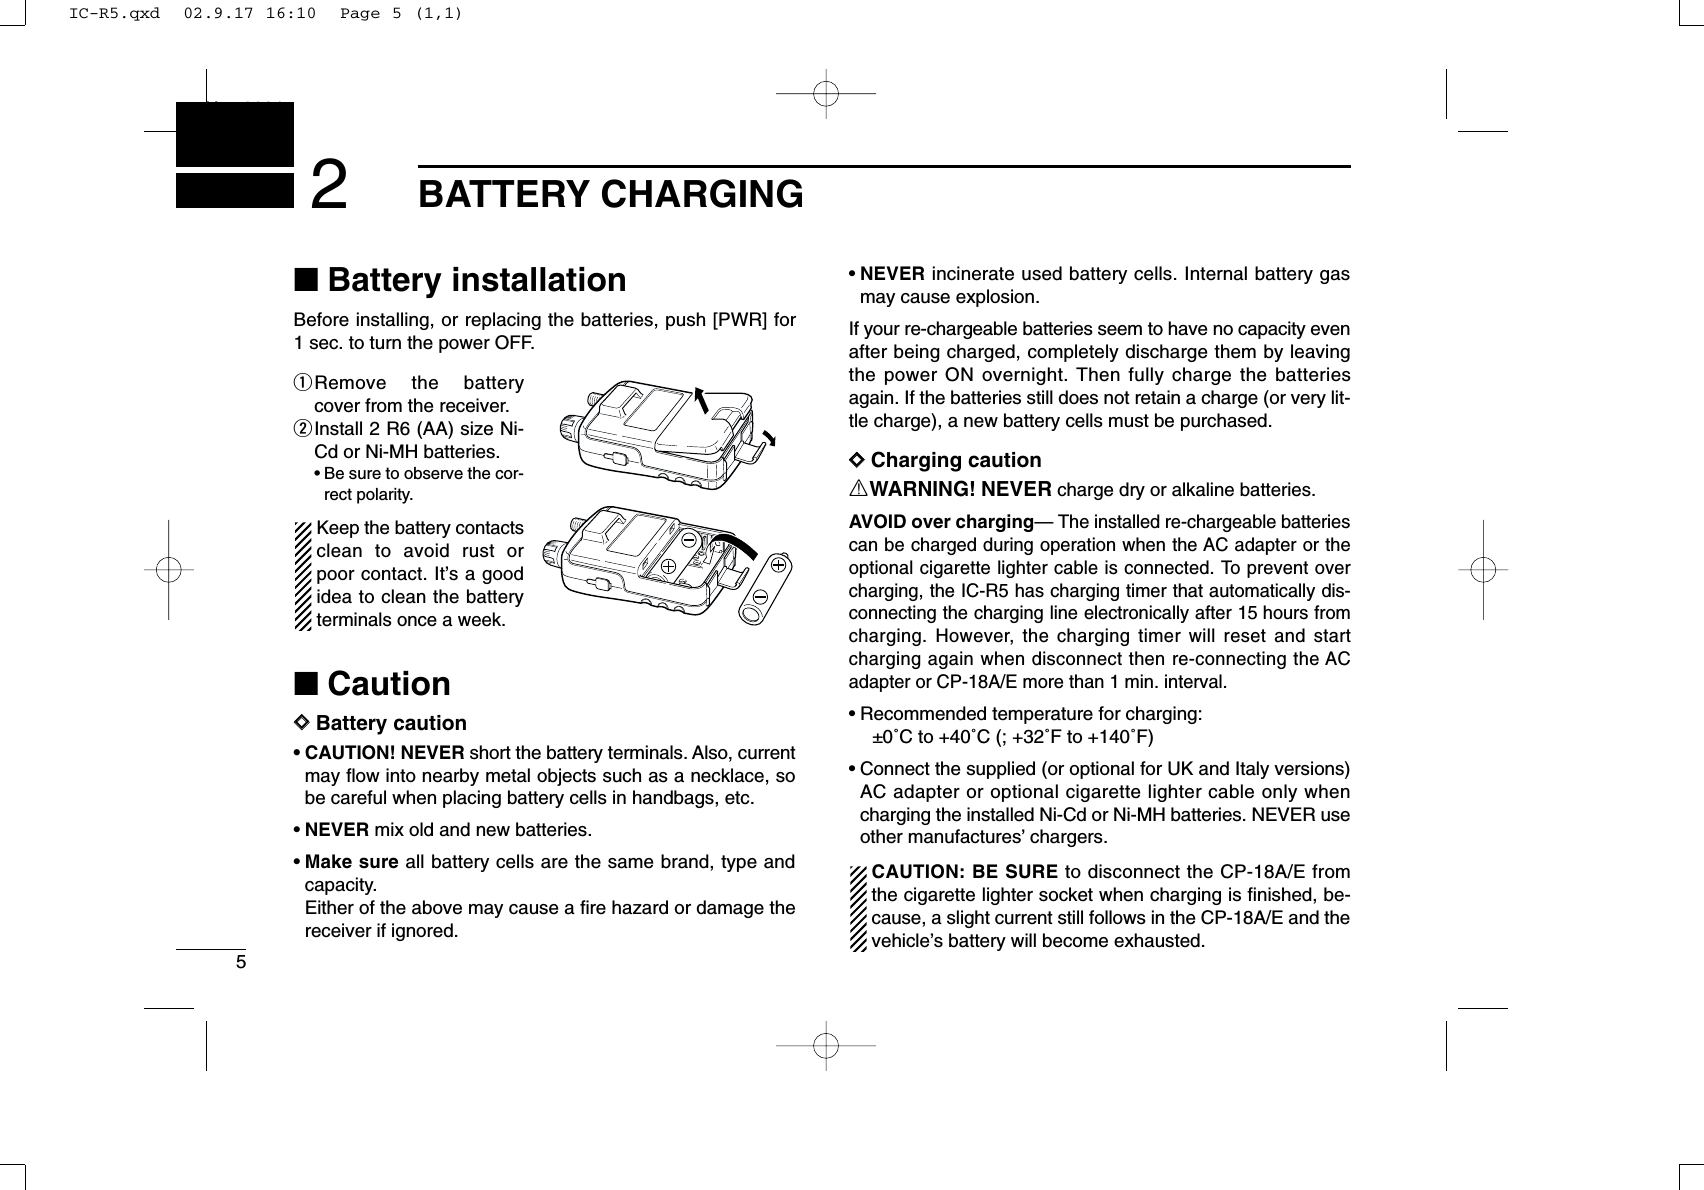 5BATTERY CHARGINGNew20012■Battery installationBefore installing, or replacing the batteries, push [PWR] for1 sec. to turn the power OFF.qRemove the batterycover from the receiver.wInstall 2 R6 (AA) size Ni-Cd or Ni-MH batteries.•Be sure to observe the cor-rect polarity.Keep the battery contactsclean to avoid rust orpoor contact. It’s a goodidea to clean the batteryterminals once a week.■CautionDDBattery caution•CAUTION! NEVER short the battery terminals. Also, currentmay ﬂow into nearby metal objects such as a necklace, sobe careful when placing battery cells in handbags, etc.•NEVER mix old and new batteries.•Make sure all battery cells are the same brand, type andcapacity.Either of the above may cause a ﬁre hazard or damage thereceiver if ignored.•NEVER incinerate used battery cells. Internal battery gasmay cause explosion.If your re-chargeable batteries seem to have no capacity evenafter being charged, completely discharge them by leavingthe power ON overnight. Then fully charge the batteriesagain. If the batteries still does not retain a charge (or very lit-tle charge), a new battery cells must be purchased.DDCharging cautionRWARNING! NEVER charge dry or alkaline batteries. AVOID over charging— The installed re-chargeable batteriescan be charged during operation when the AC adapter or theoptional cigarette lighter cable is connected. To prevent overcharging, the IC-R5 has charging timer that automatically dis-connecting the charging line electronically after 15 hours fromcharging. However, the charging timer will reset and startcharging again when disconnect then re-connecting the ACadapter or CP-18A/E more than 1 min. interval.•Recommended temperature for charging:±0˚C to +40˚C (; +32˚F to +140˚F)•Connect the supplied (or optional for UK and Italy versions)AC adapter or optional cigarette lighter cable only whencharging the installed Ni-Cd or Ni-MH batteries. NEVER useother manufactures’chargers.CAUTION: BE SURE to disconnect the CP-18A/E fromthe cigarette lighter socket when charging is ﬁnished, be-cause, a slight current still follows in the CP-18A/E and thevehicle’s battery will become exhausted.IC-R5.qxd  02.9.17 16:10  Page 5 (1,1)